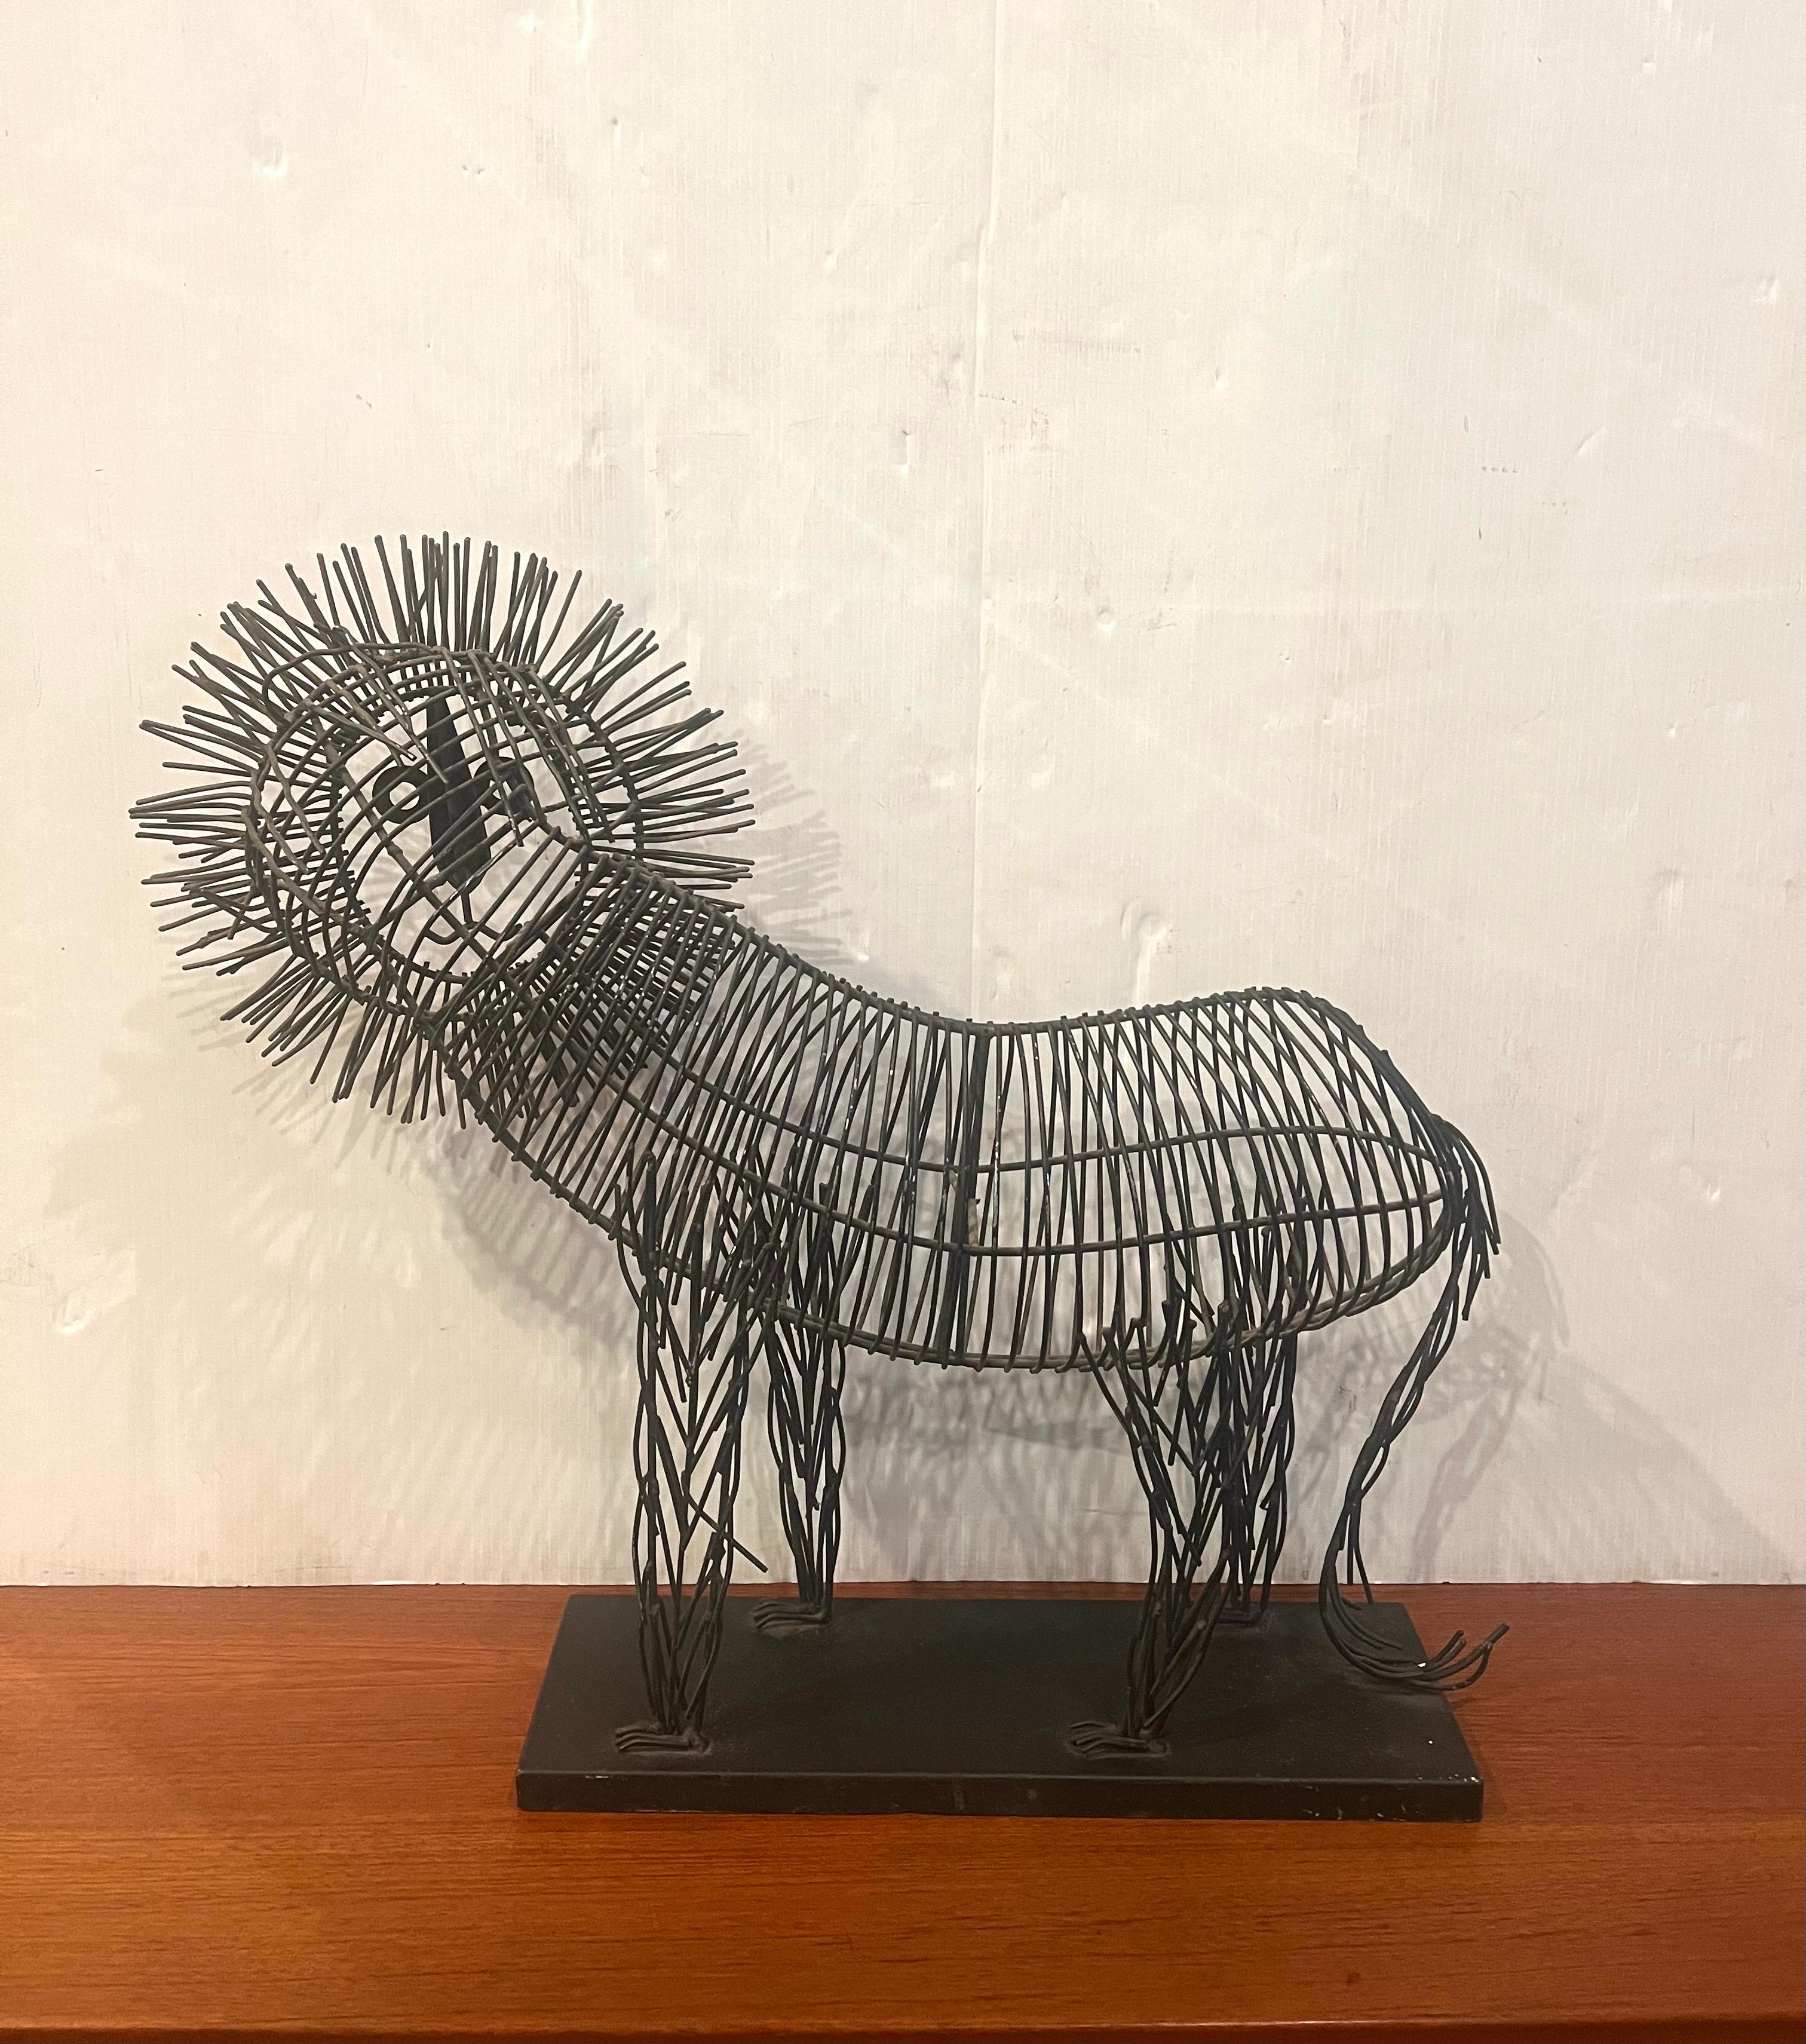 Metal wire large and rare size sculpture of a lion on a black metal base. The body is black metal wire and the mane is tinted in gold. In the style of C. Jere, circa 1990s.